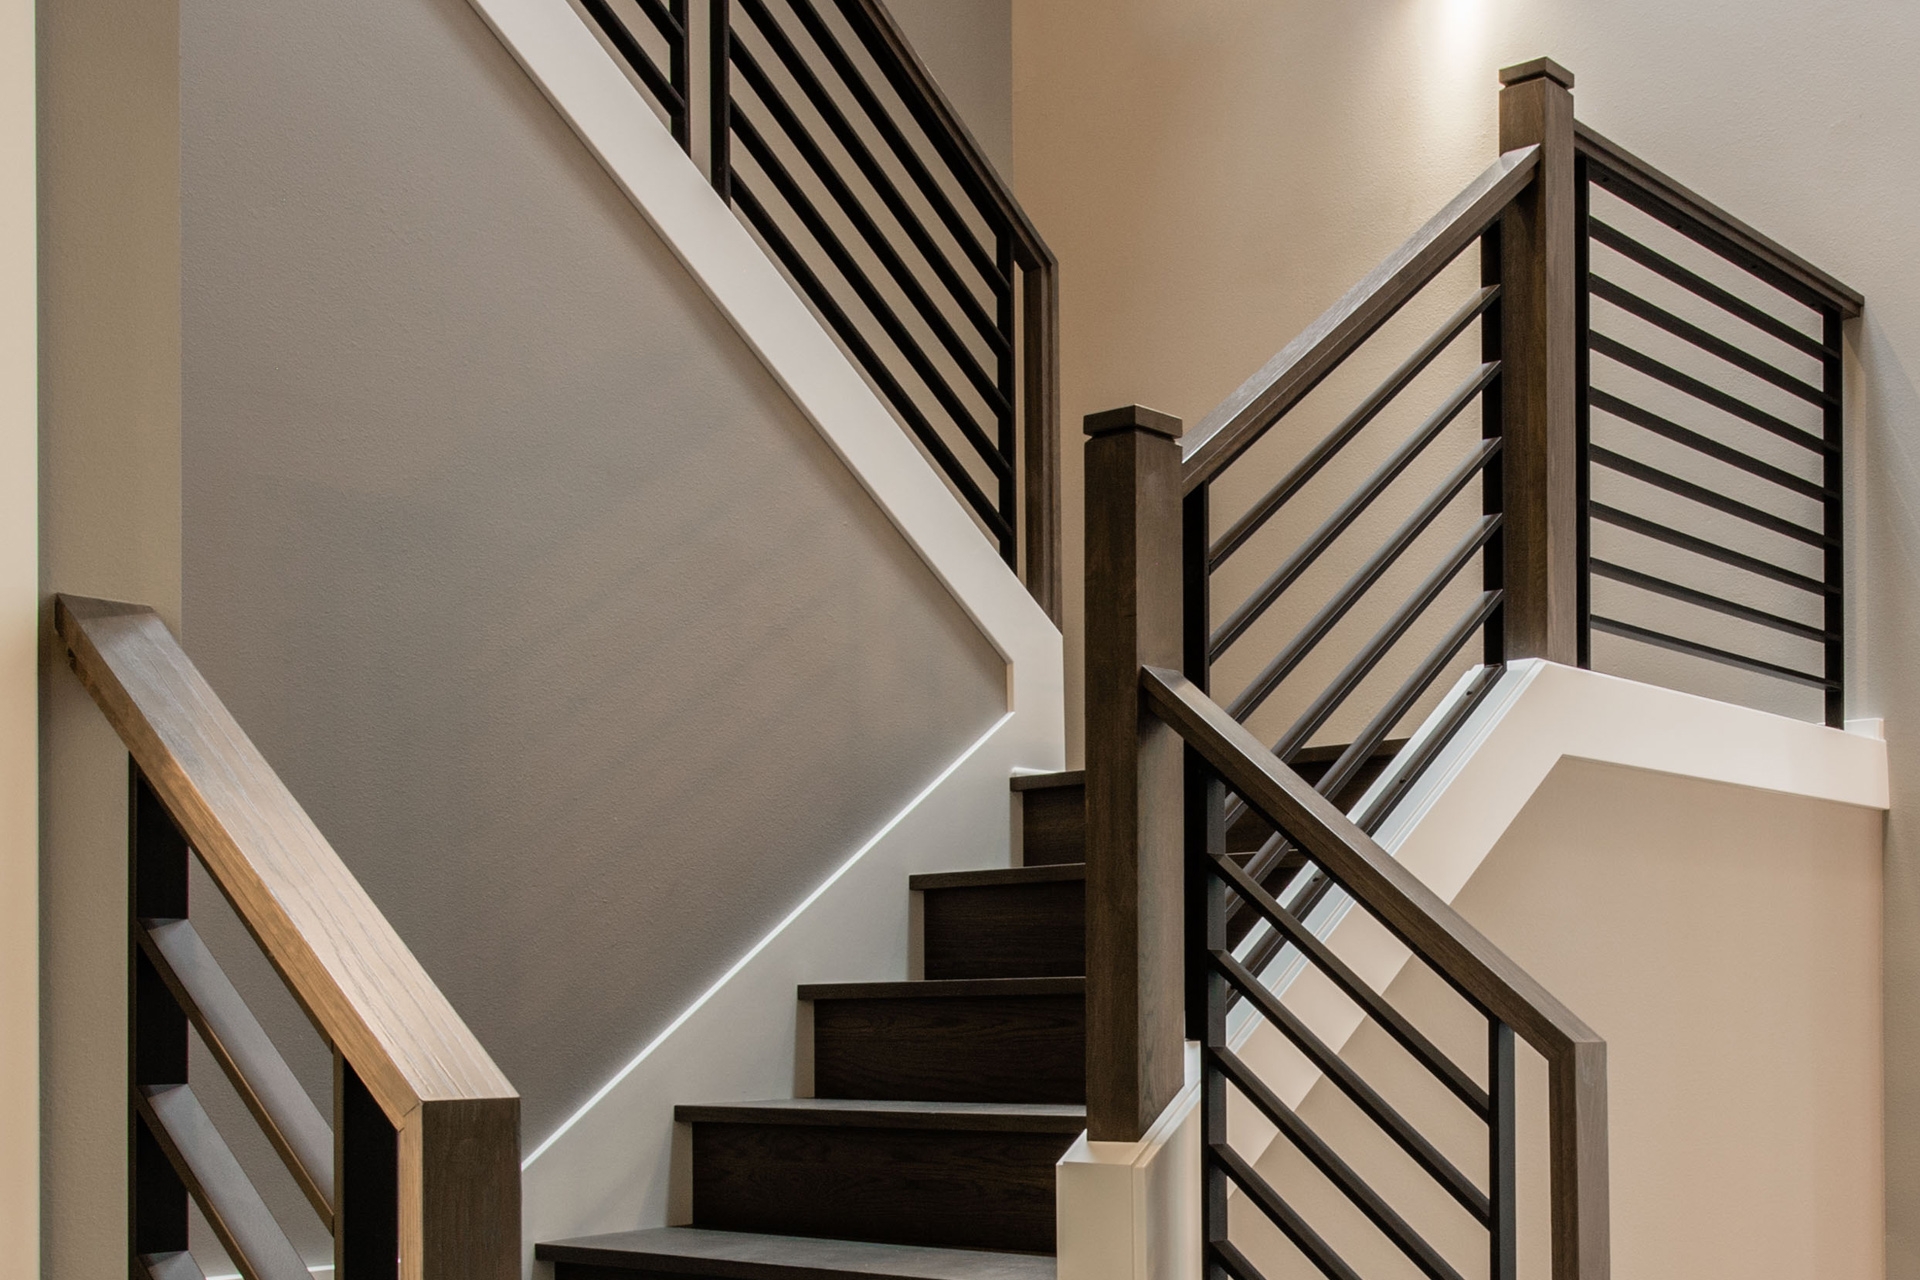 Stair Systems Stairs Stair Parts Newels Balusters And Railings Lj Smith Stair Systems